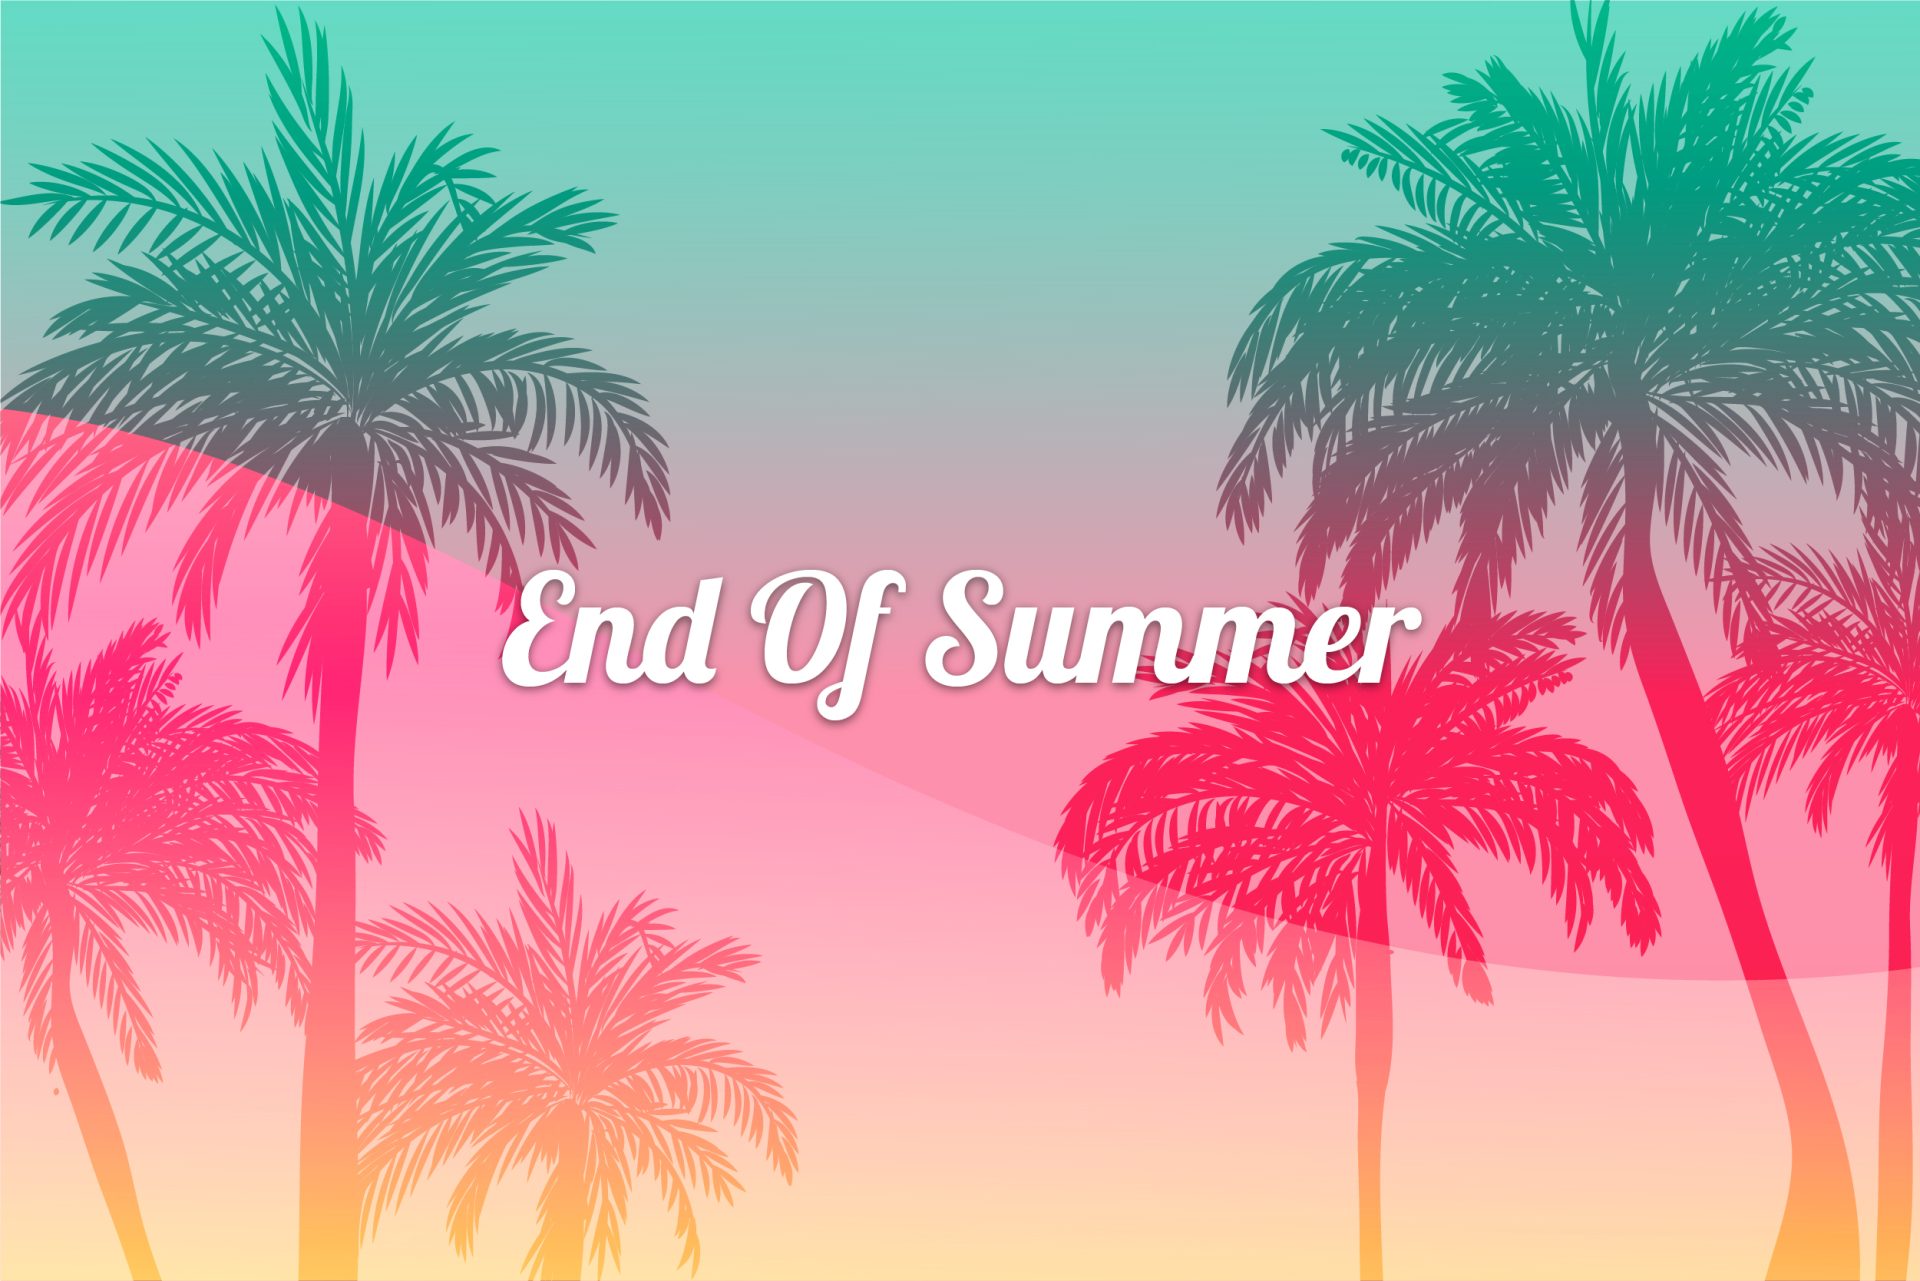 End of the summer_5-01